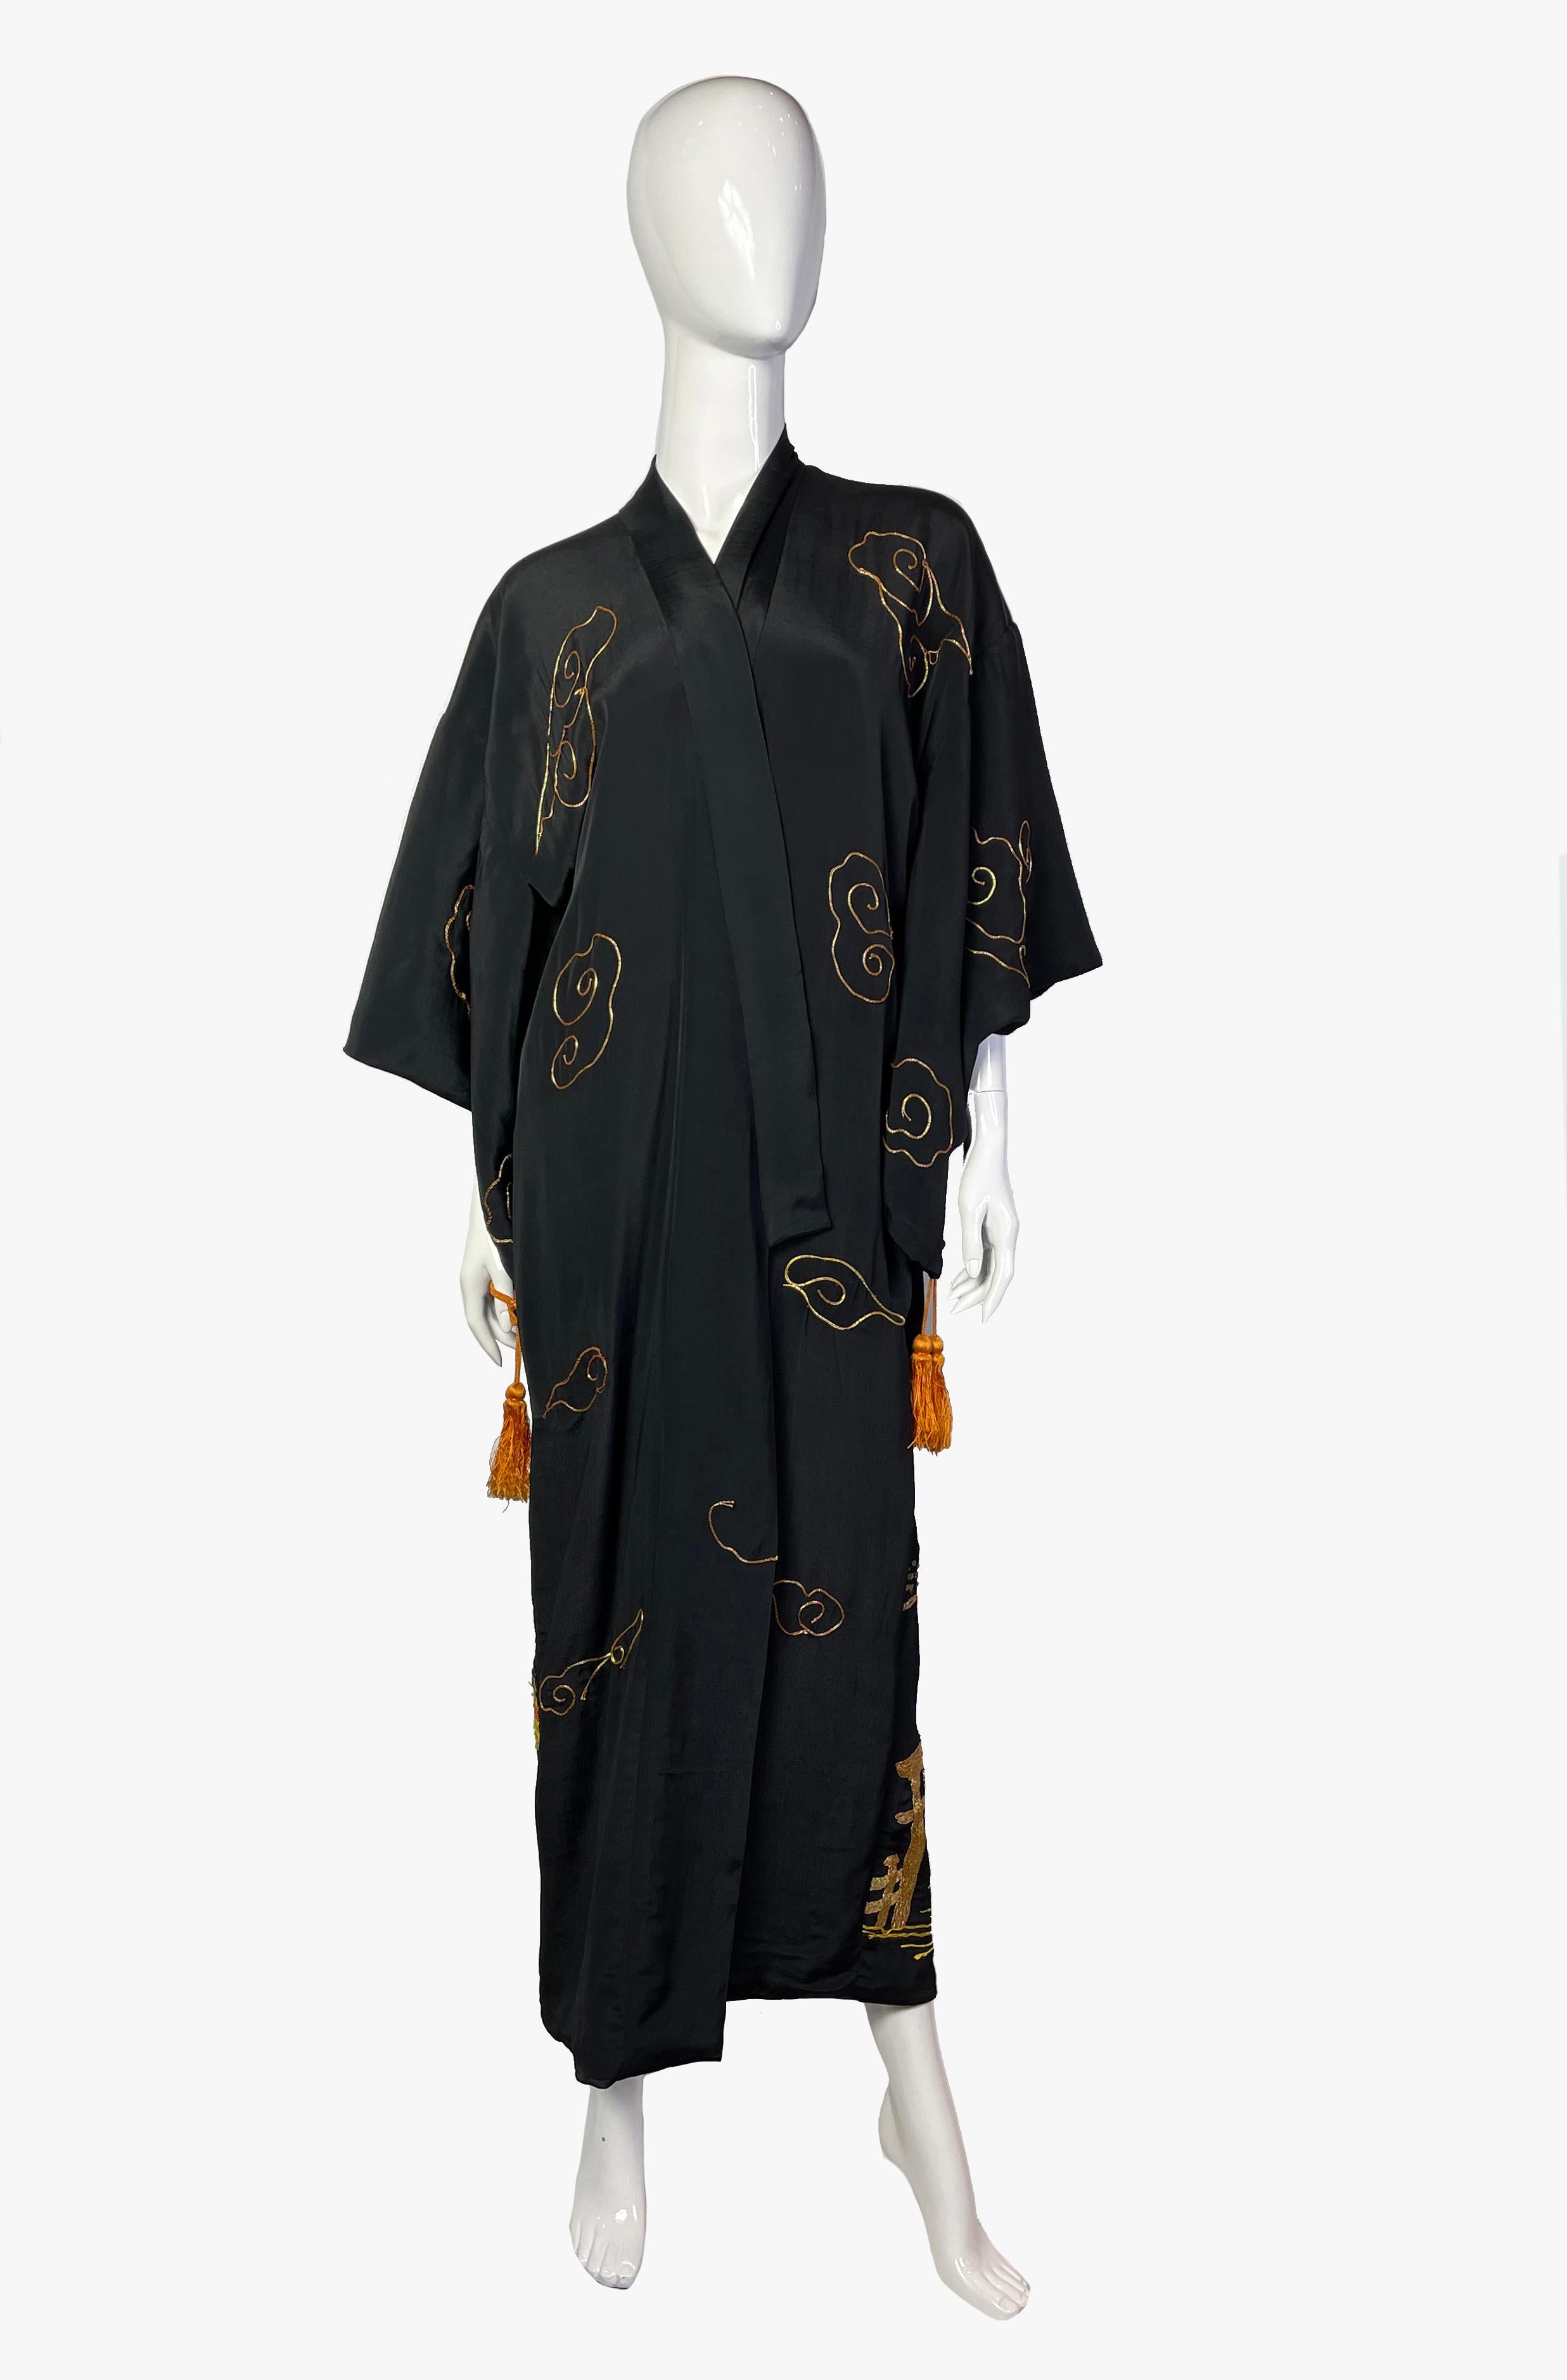 Vintage black silk kimono hand-embroidered with traditional Japanese motives.
Embroidery includes golden clouds in the front, massive embroidery of a dragon, mountains and a traditional Japanese house on the back. 

Composition: 100%